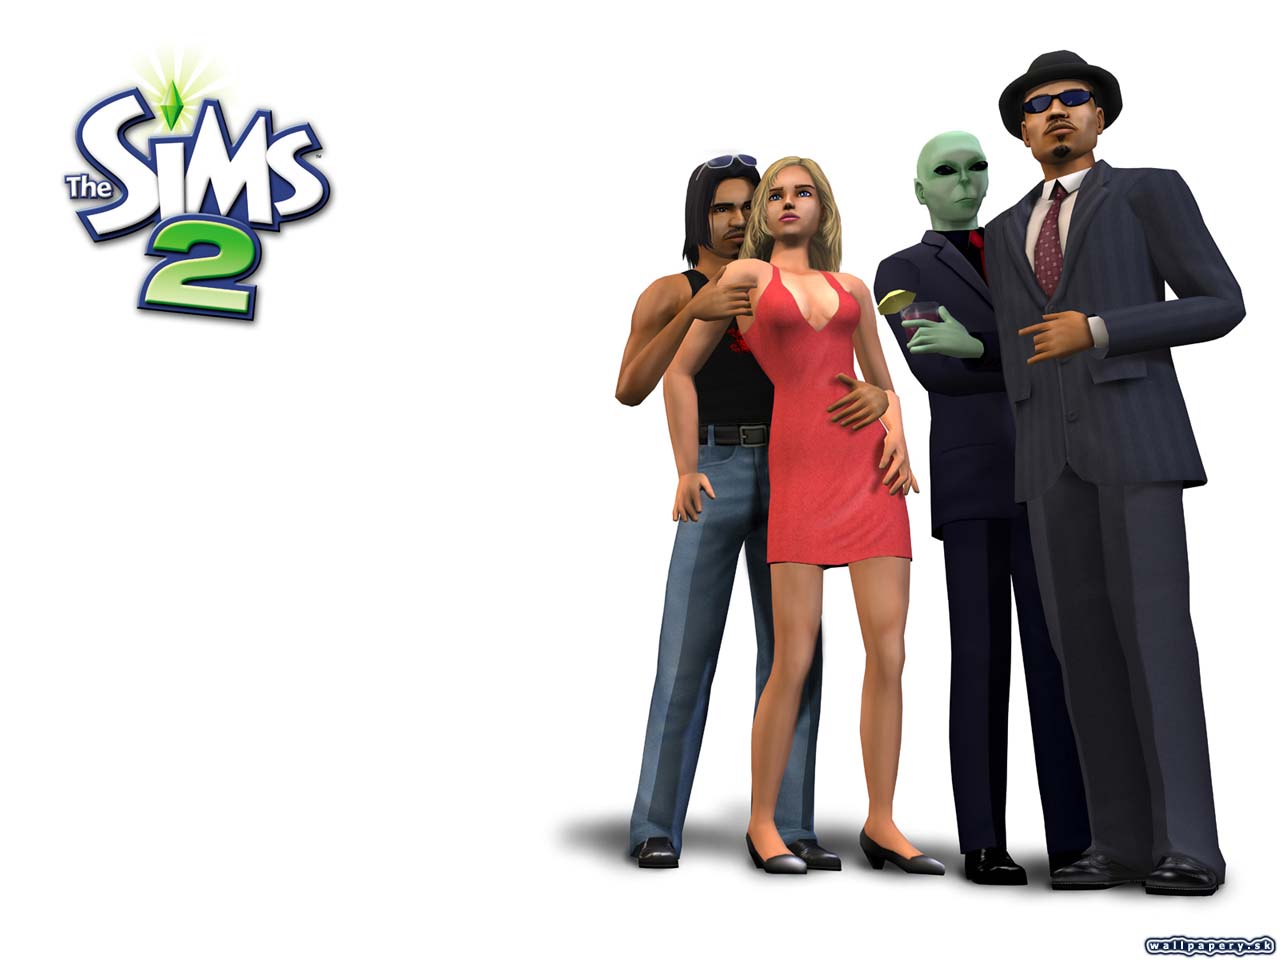 The Sims 2 - wallpaper 13